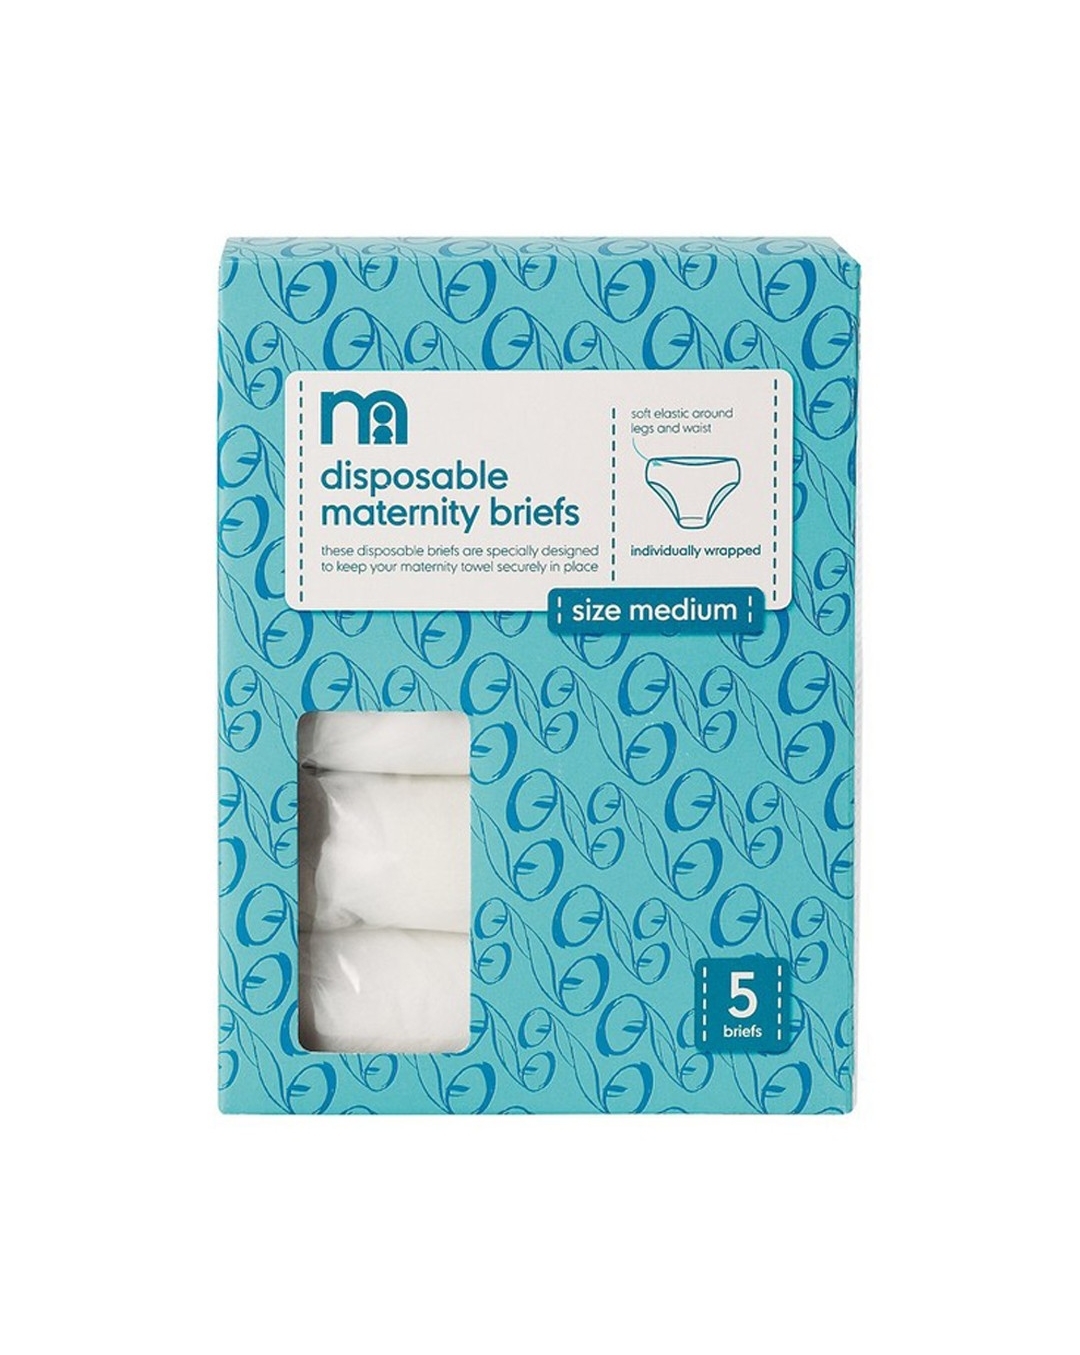 Mothercare Disposable Maternity Briefs - 5 Pack